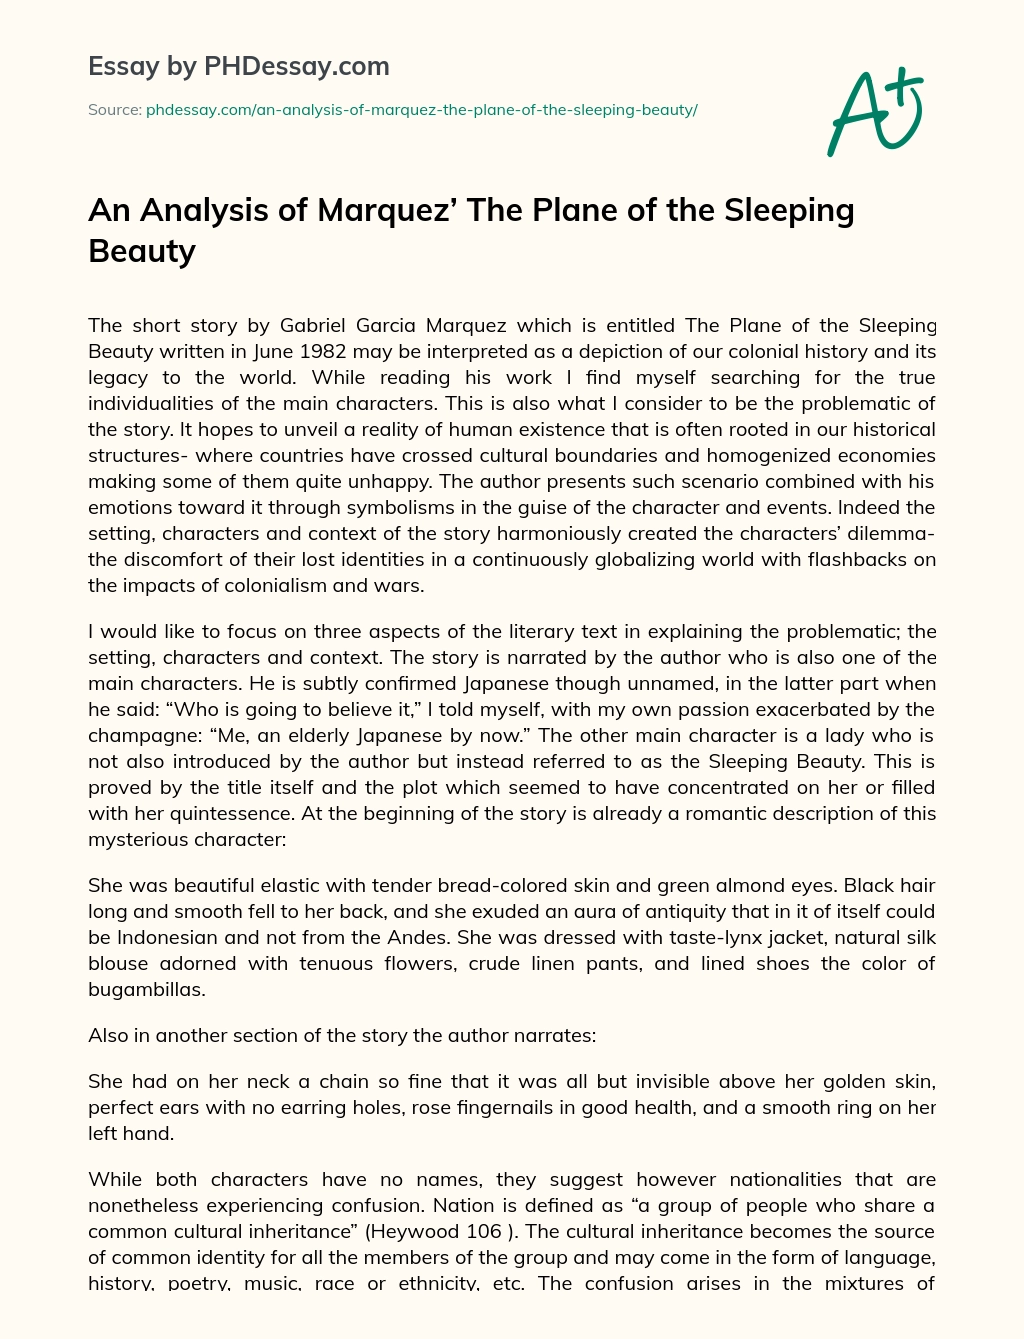 An Analysis of Marquez’ The Plane of the Sleeping Beauty essay